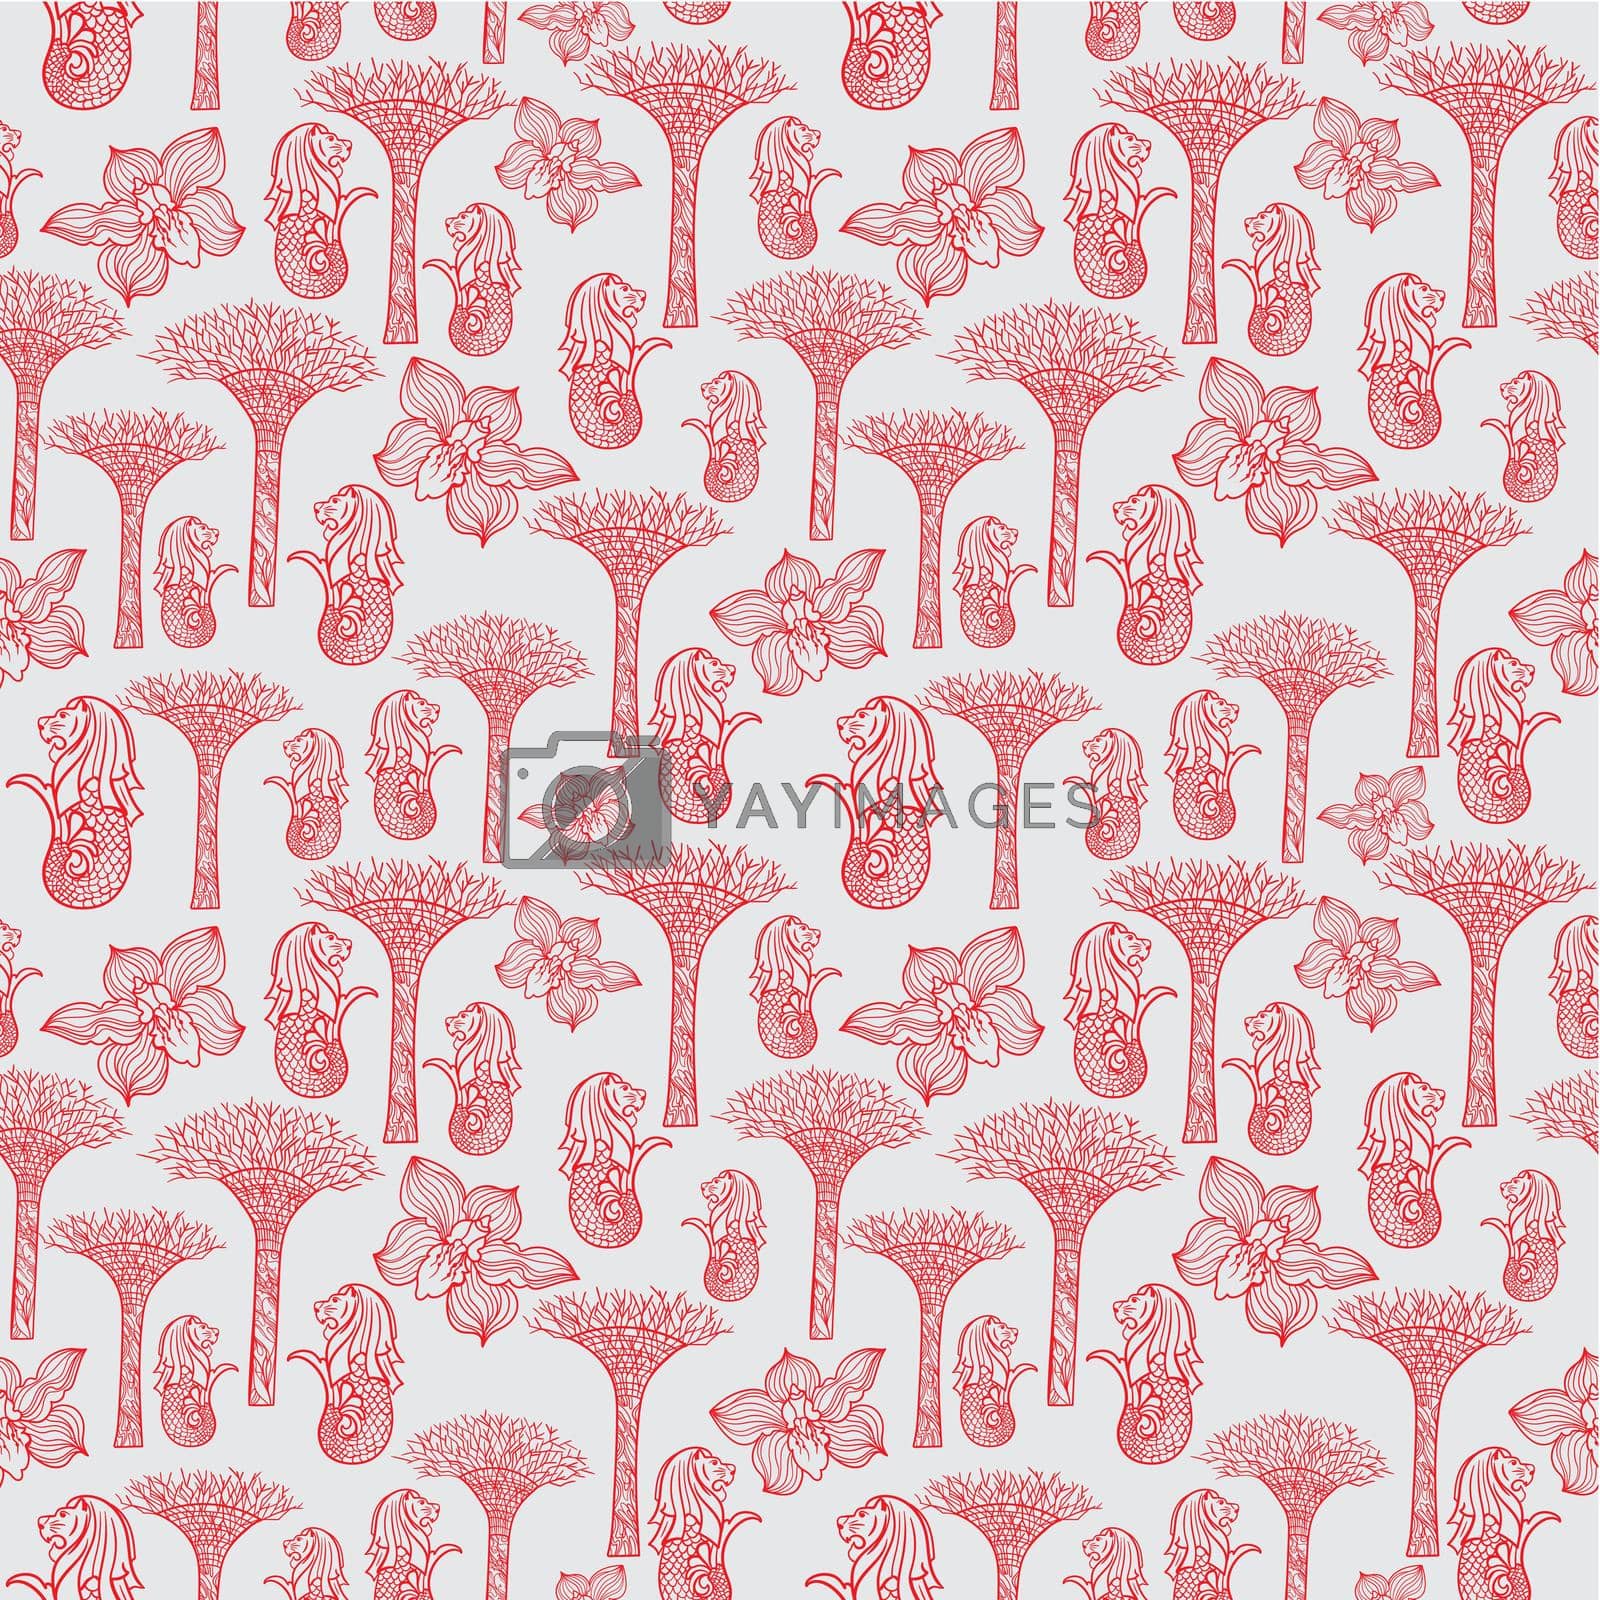 Royalty free image of Asia Travel Singapore Outline Sketch Vector Pattern by kisika